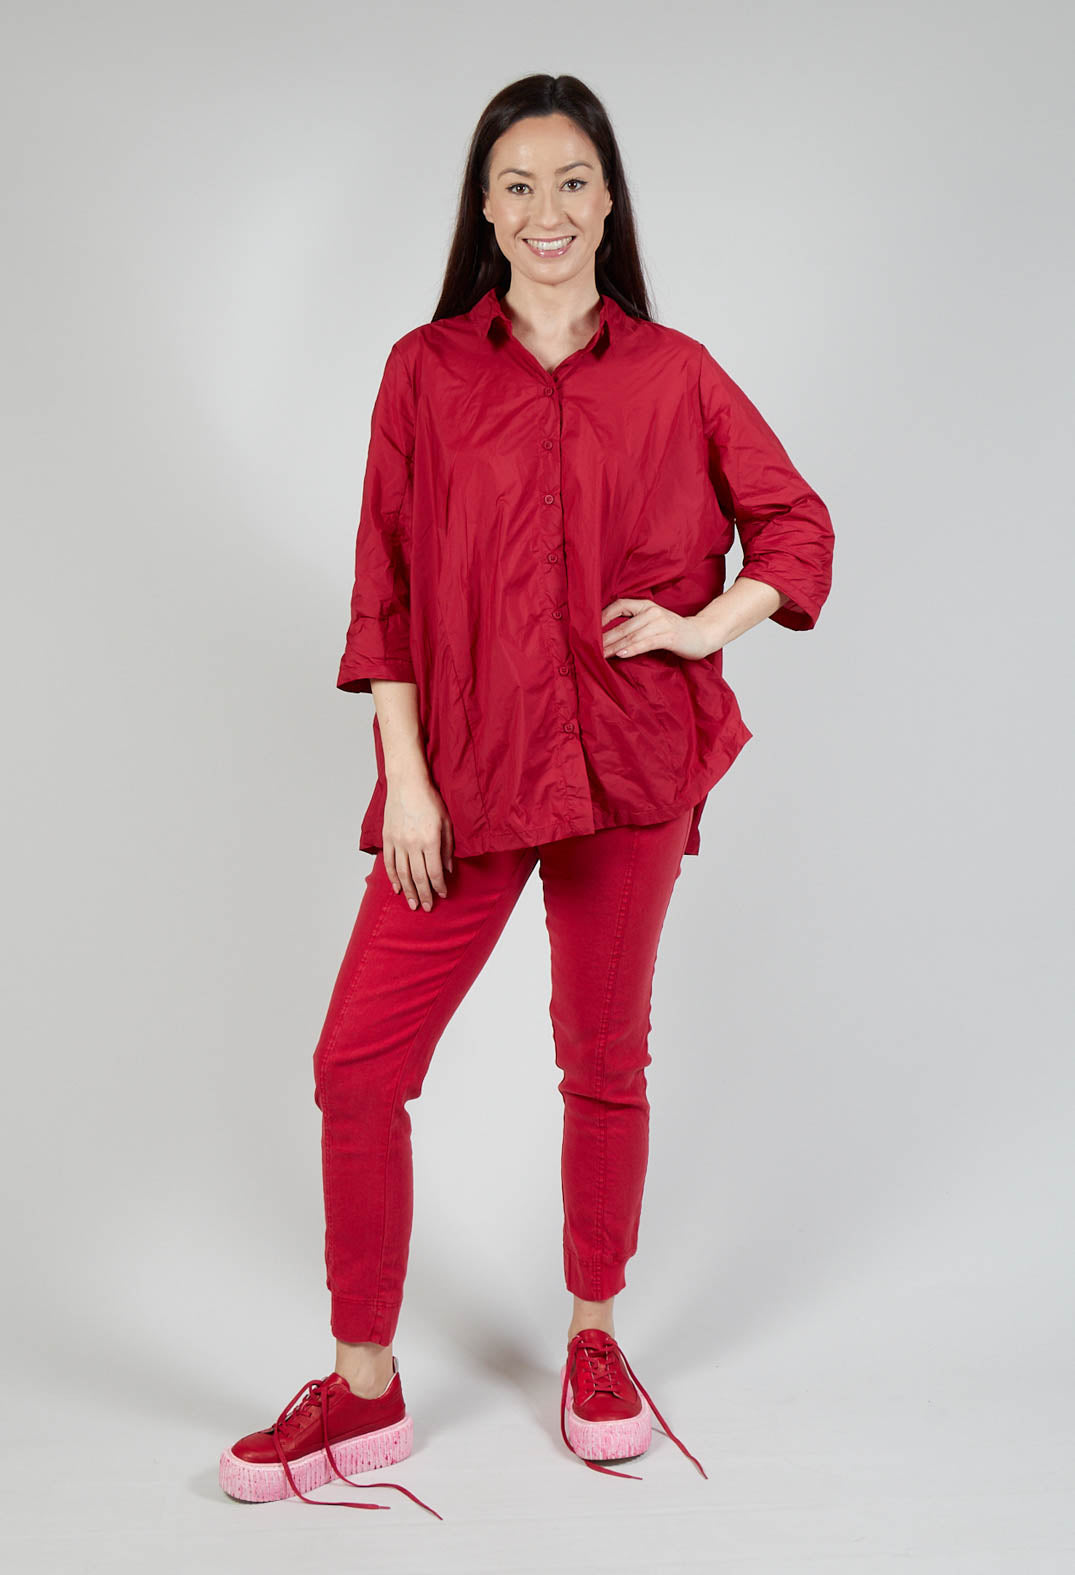 Shirt with Cropped Sleeves in Chili